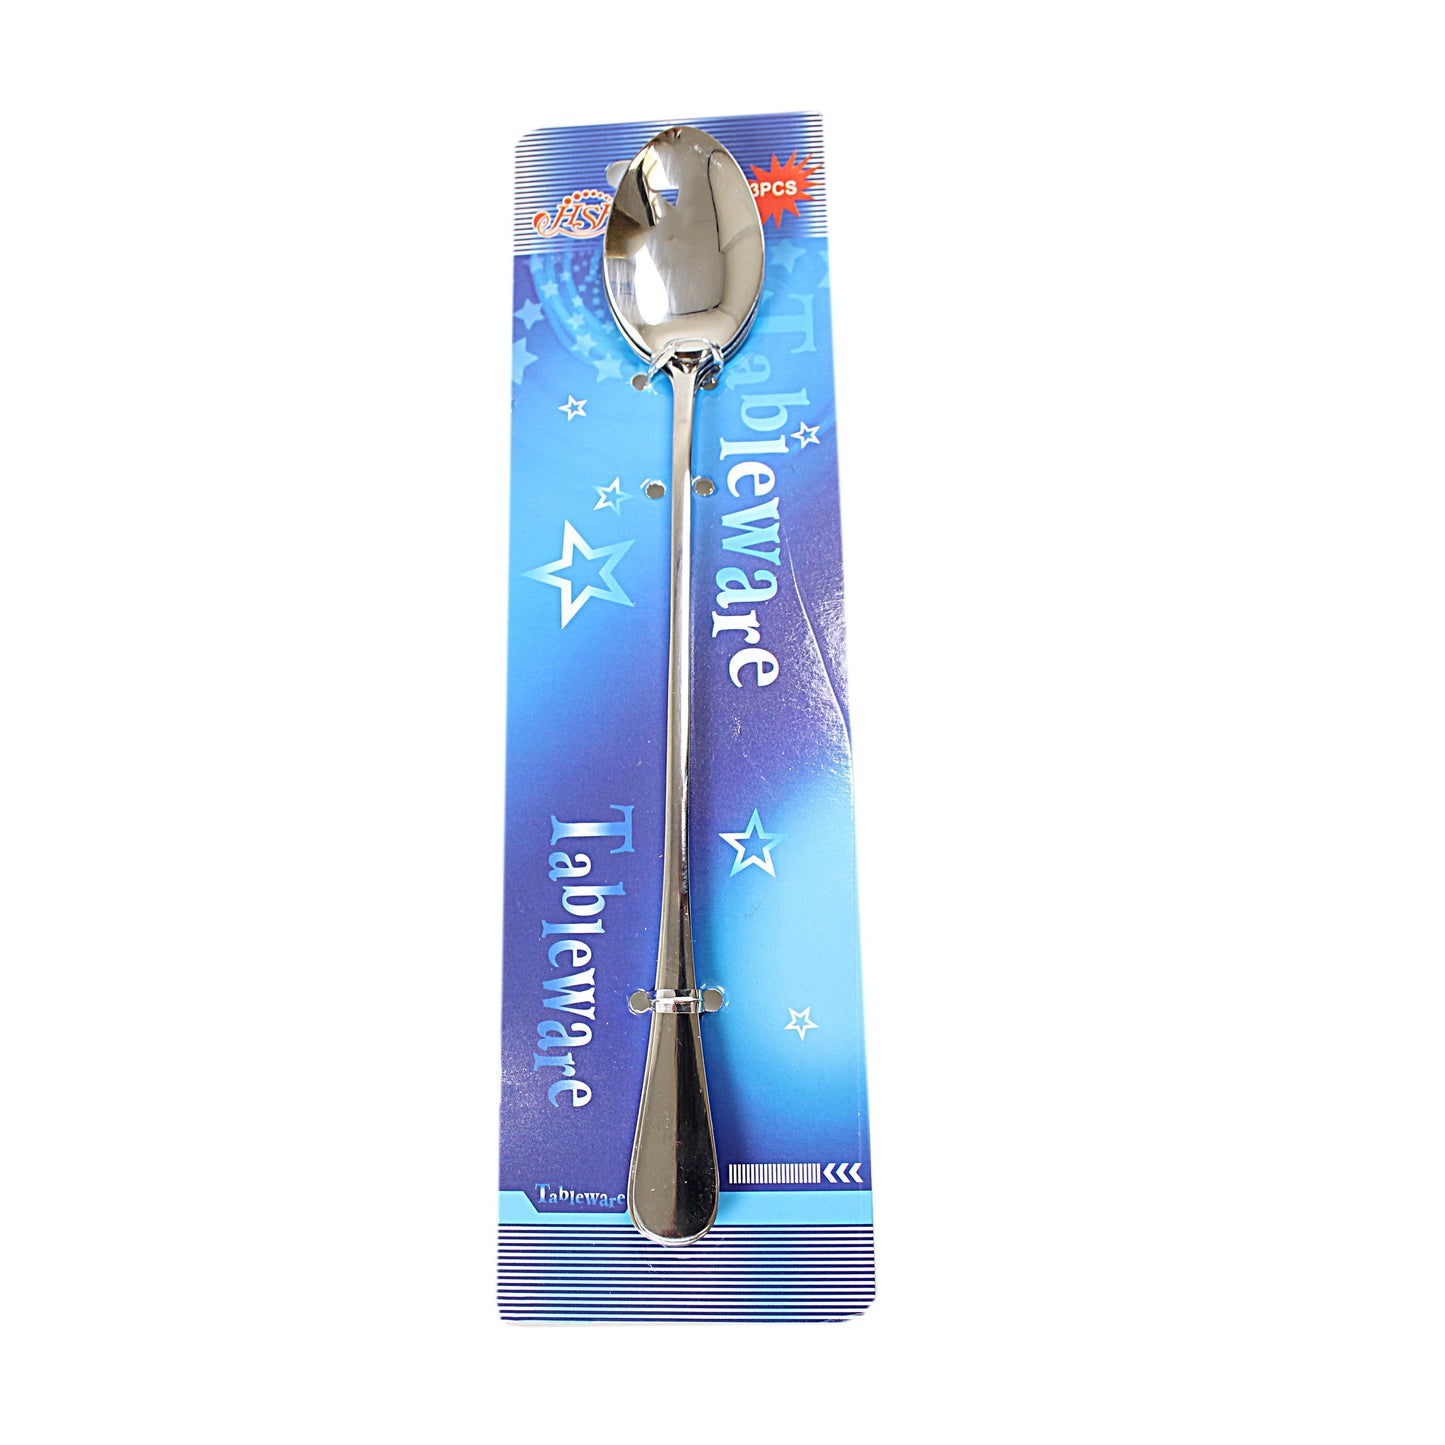 Stainless Steel Long Ice Cream Dessert Latte Spoon 20 cm Pack of 3 2746 (Large Letter Rate)